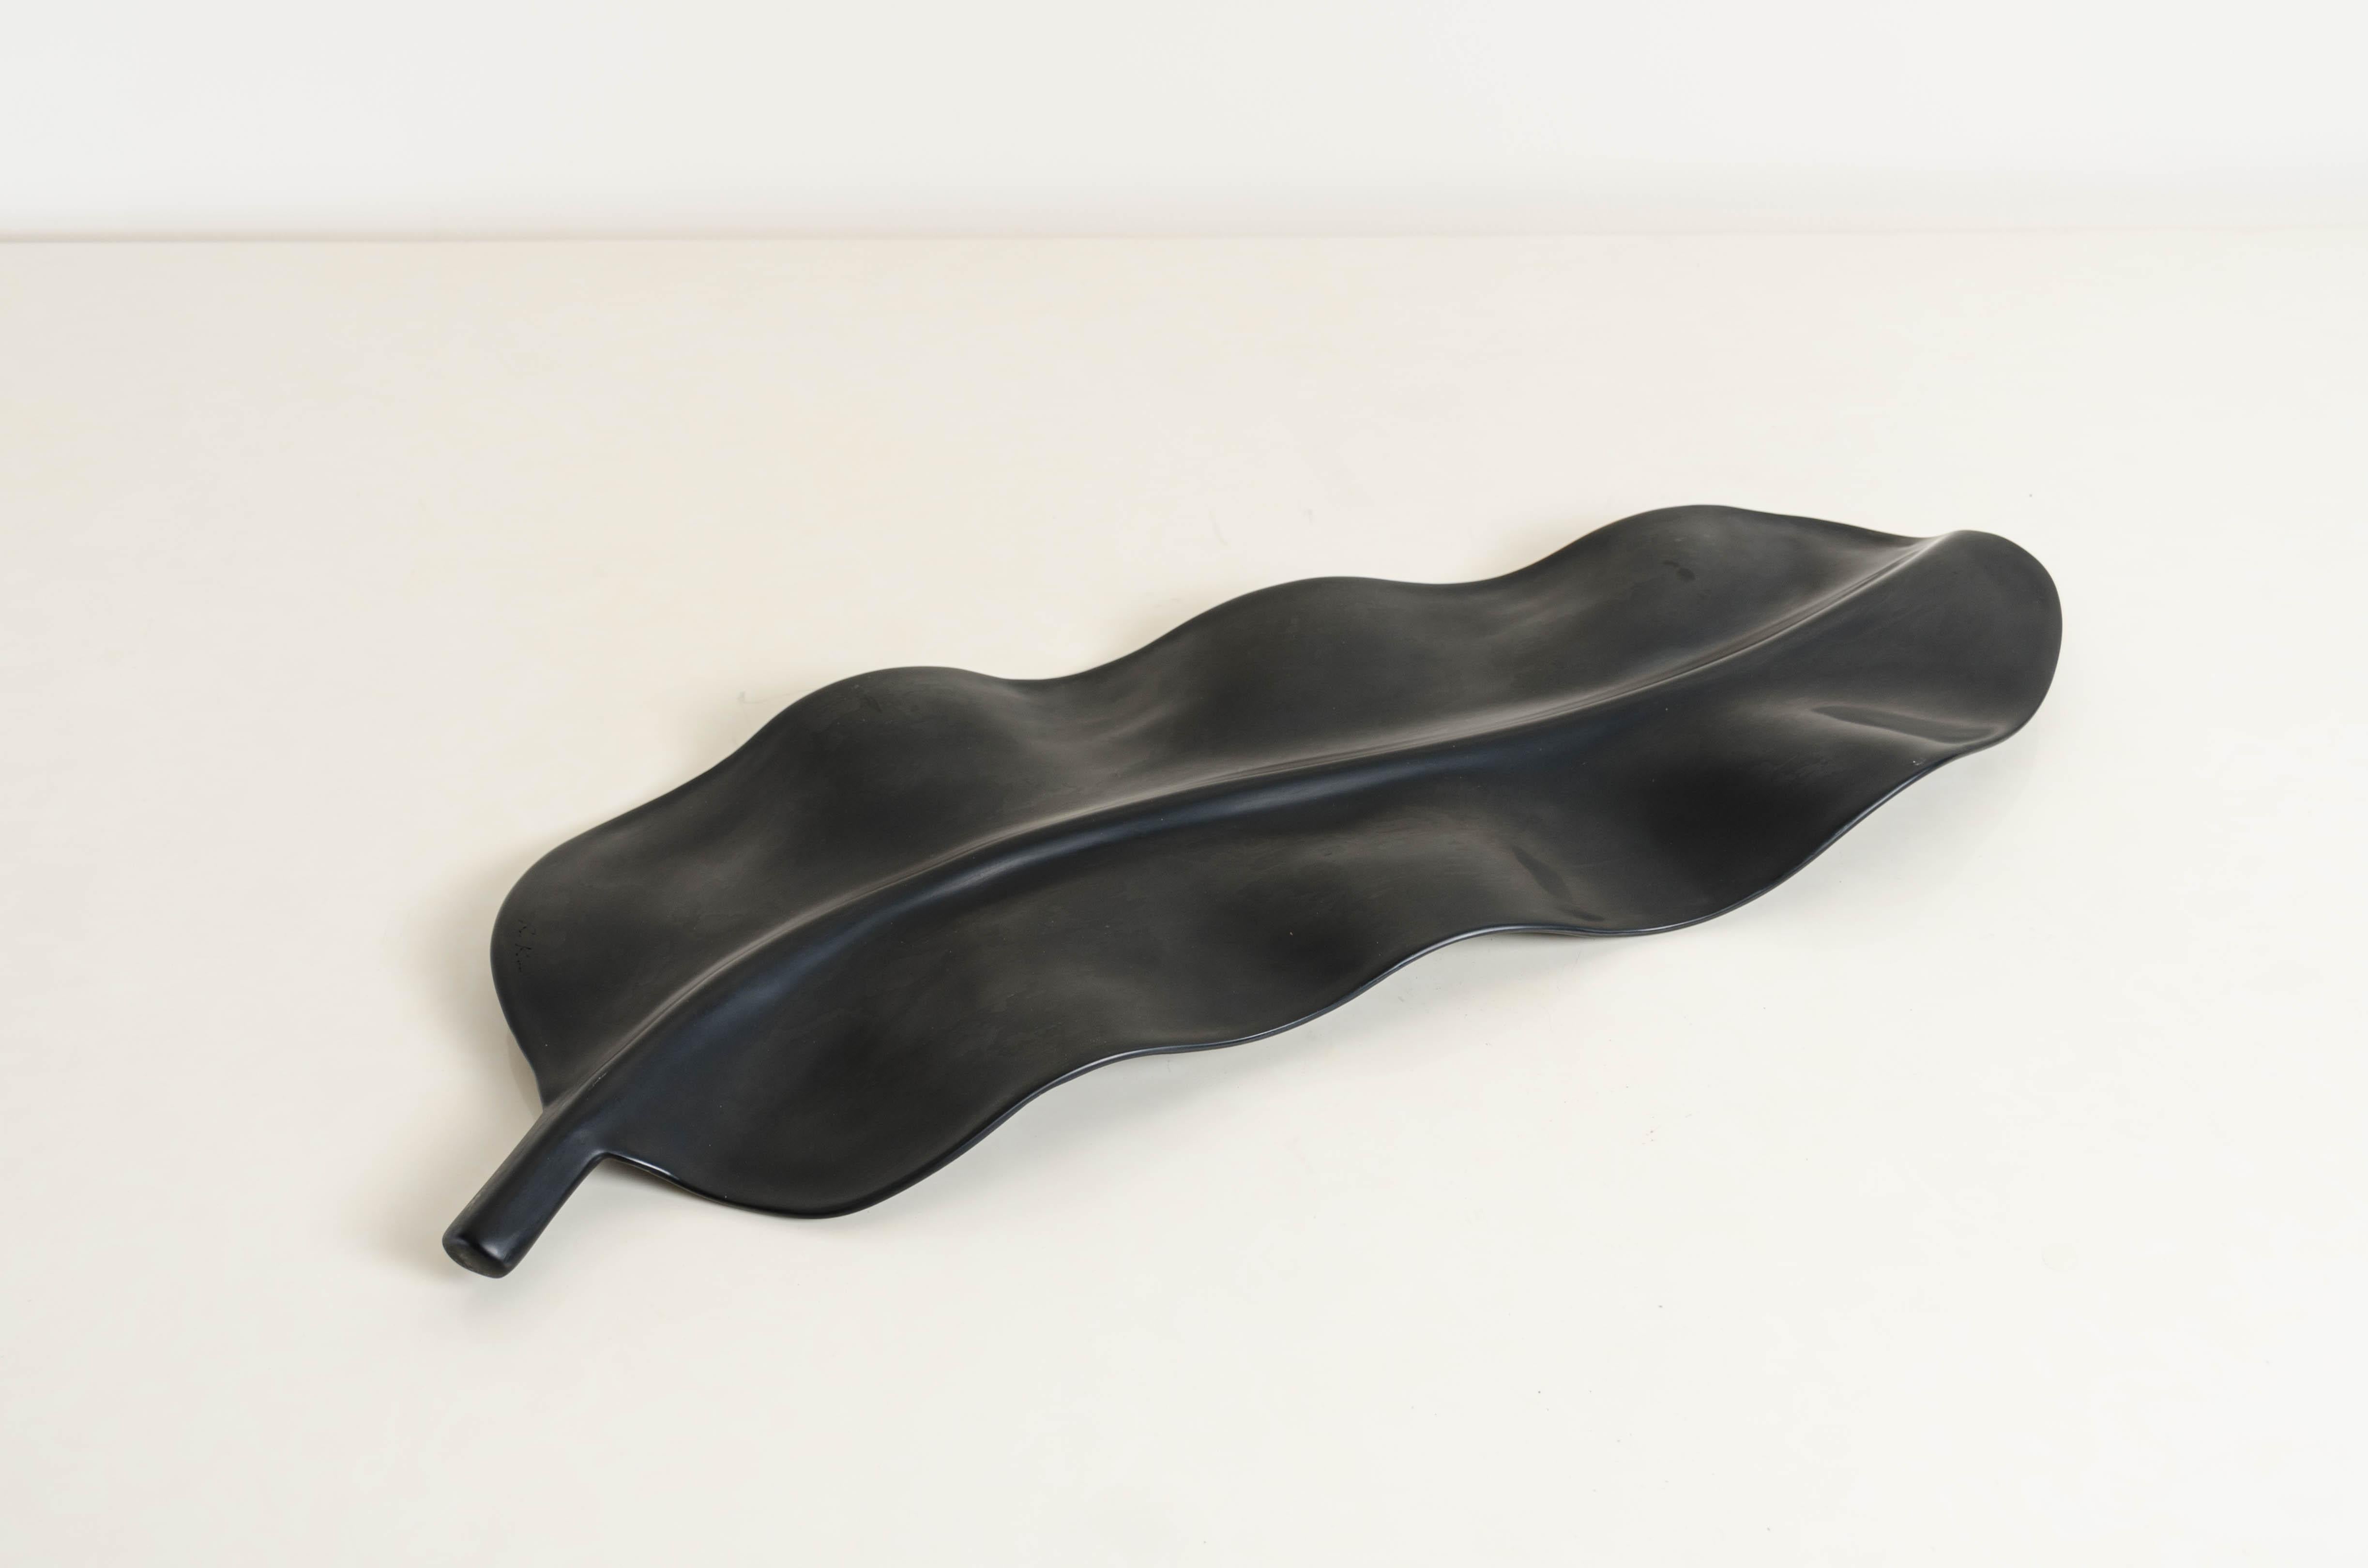 Contemporary Black Lacquer Banana Leaf Sculpture by Robert Kuo, Limited Edition For Sale 1